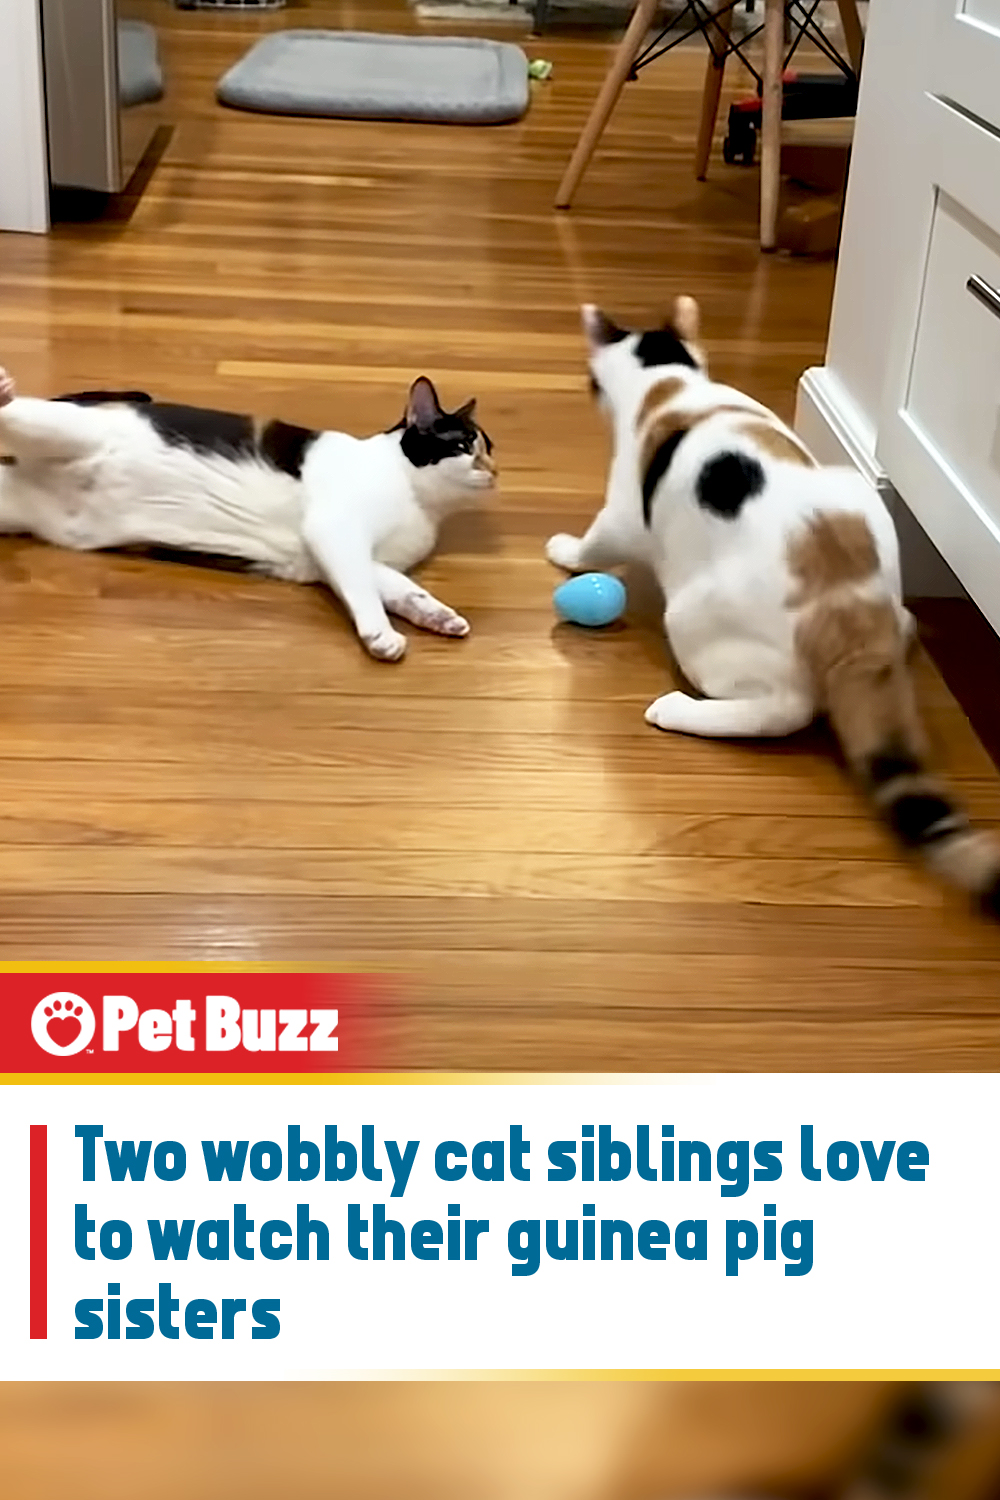 Two wobbly cat siblings love to watch their guinea pig sisters